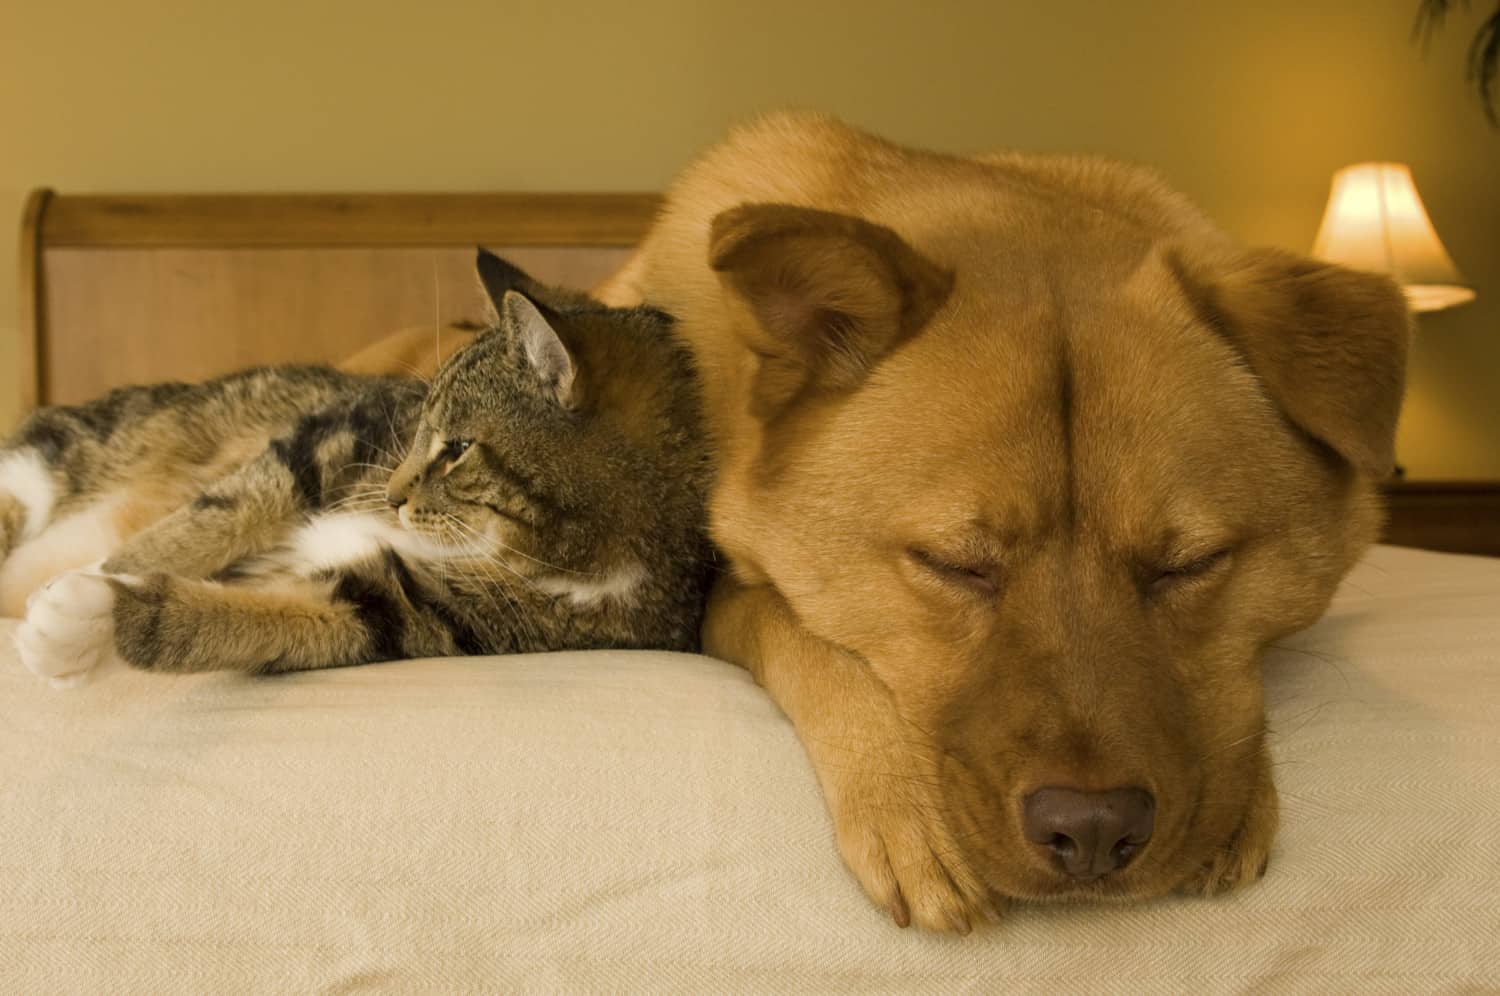 Cat and dog resting on bed in a pet friendly hotel